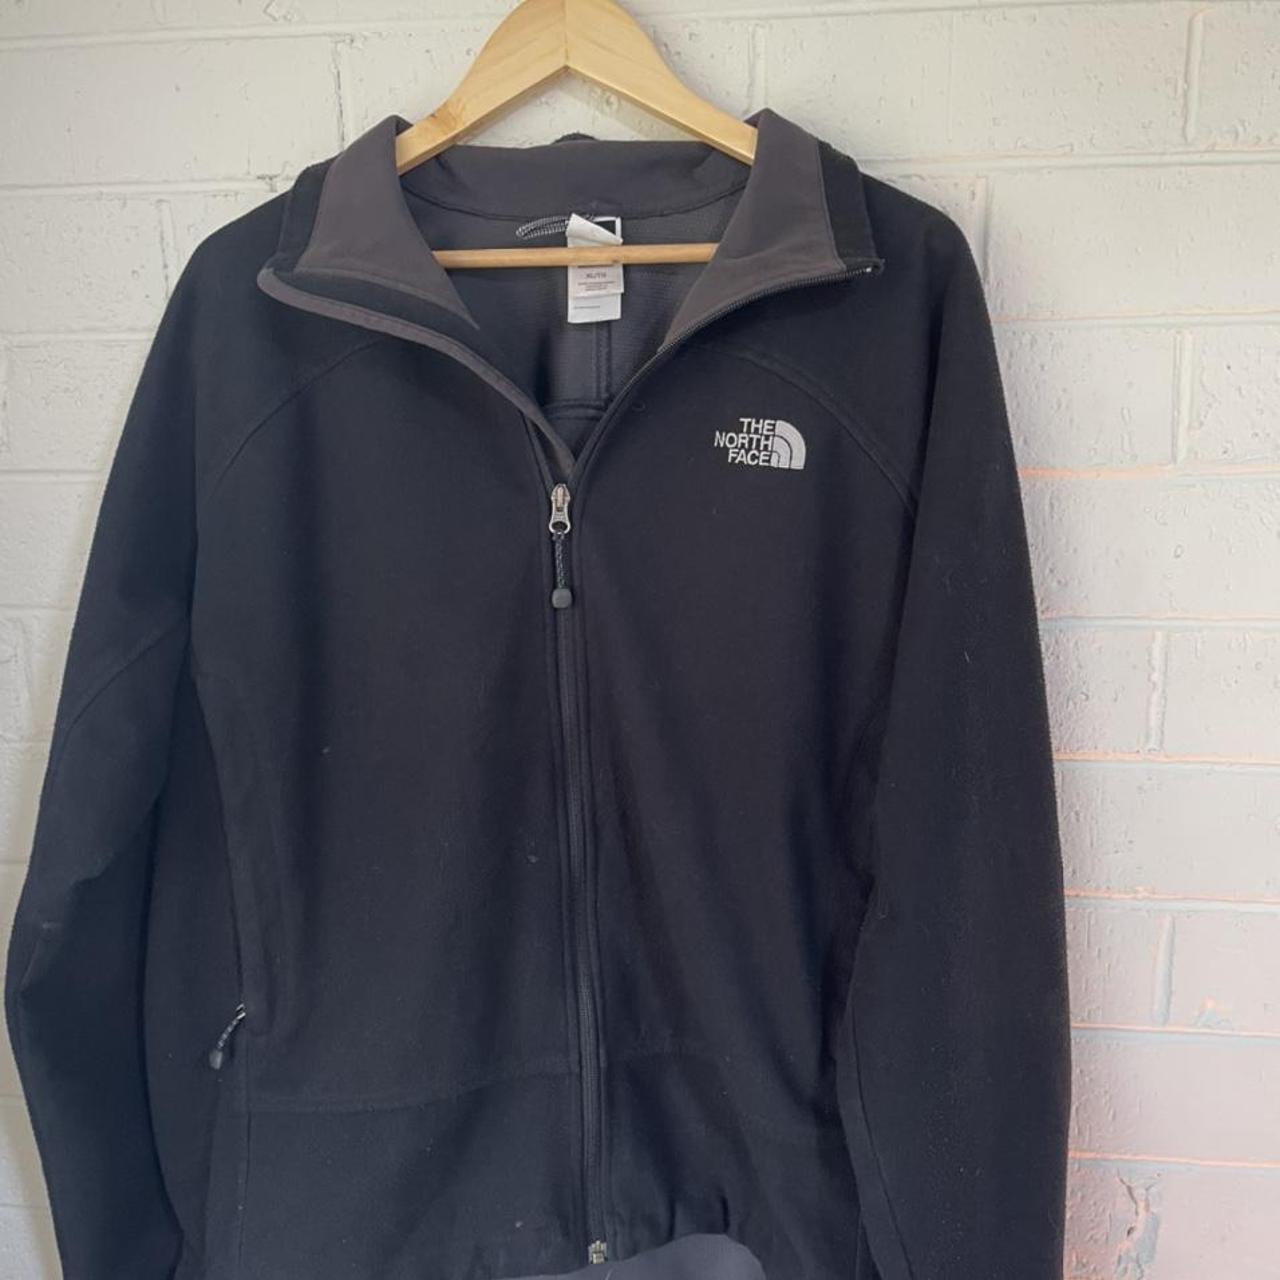 The North Face Jumper. Pre-loved and in excellent... - Depop